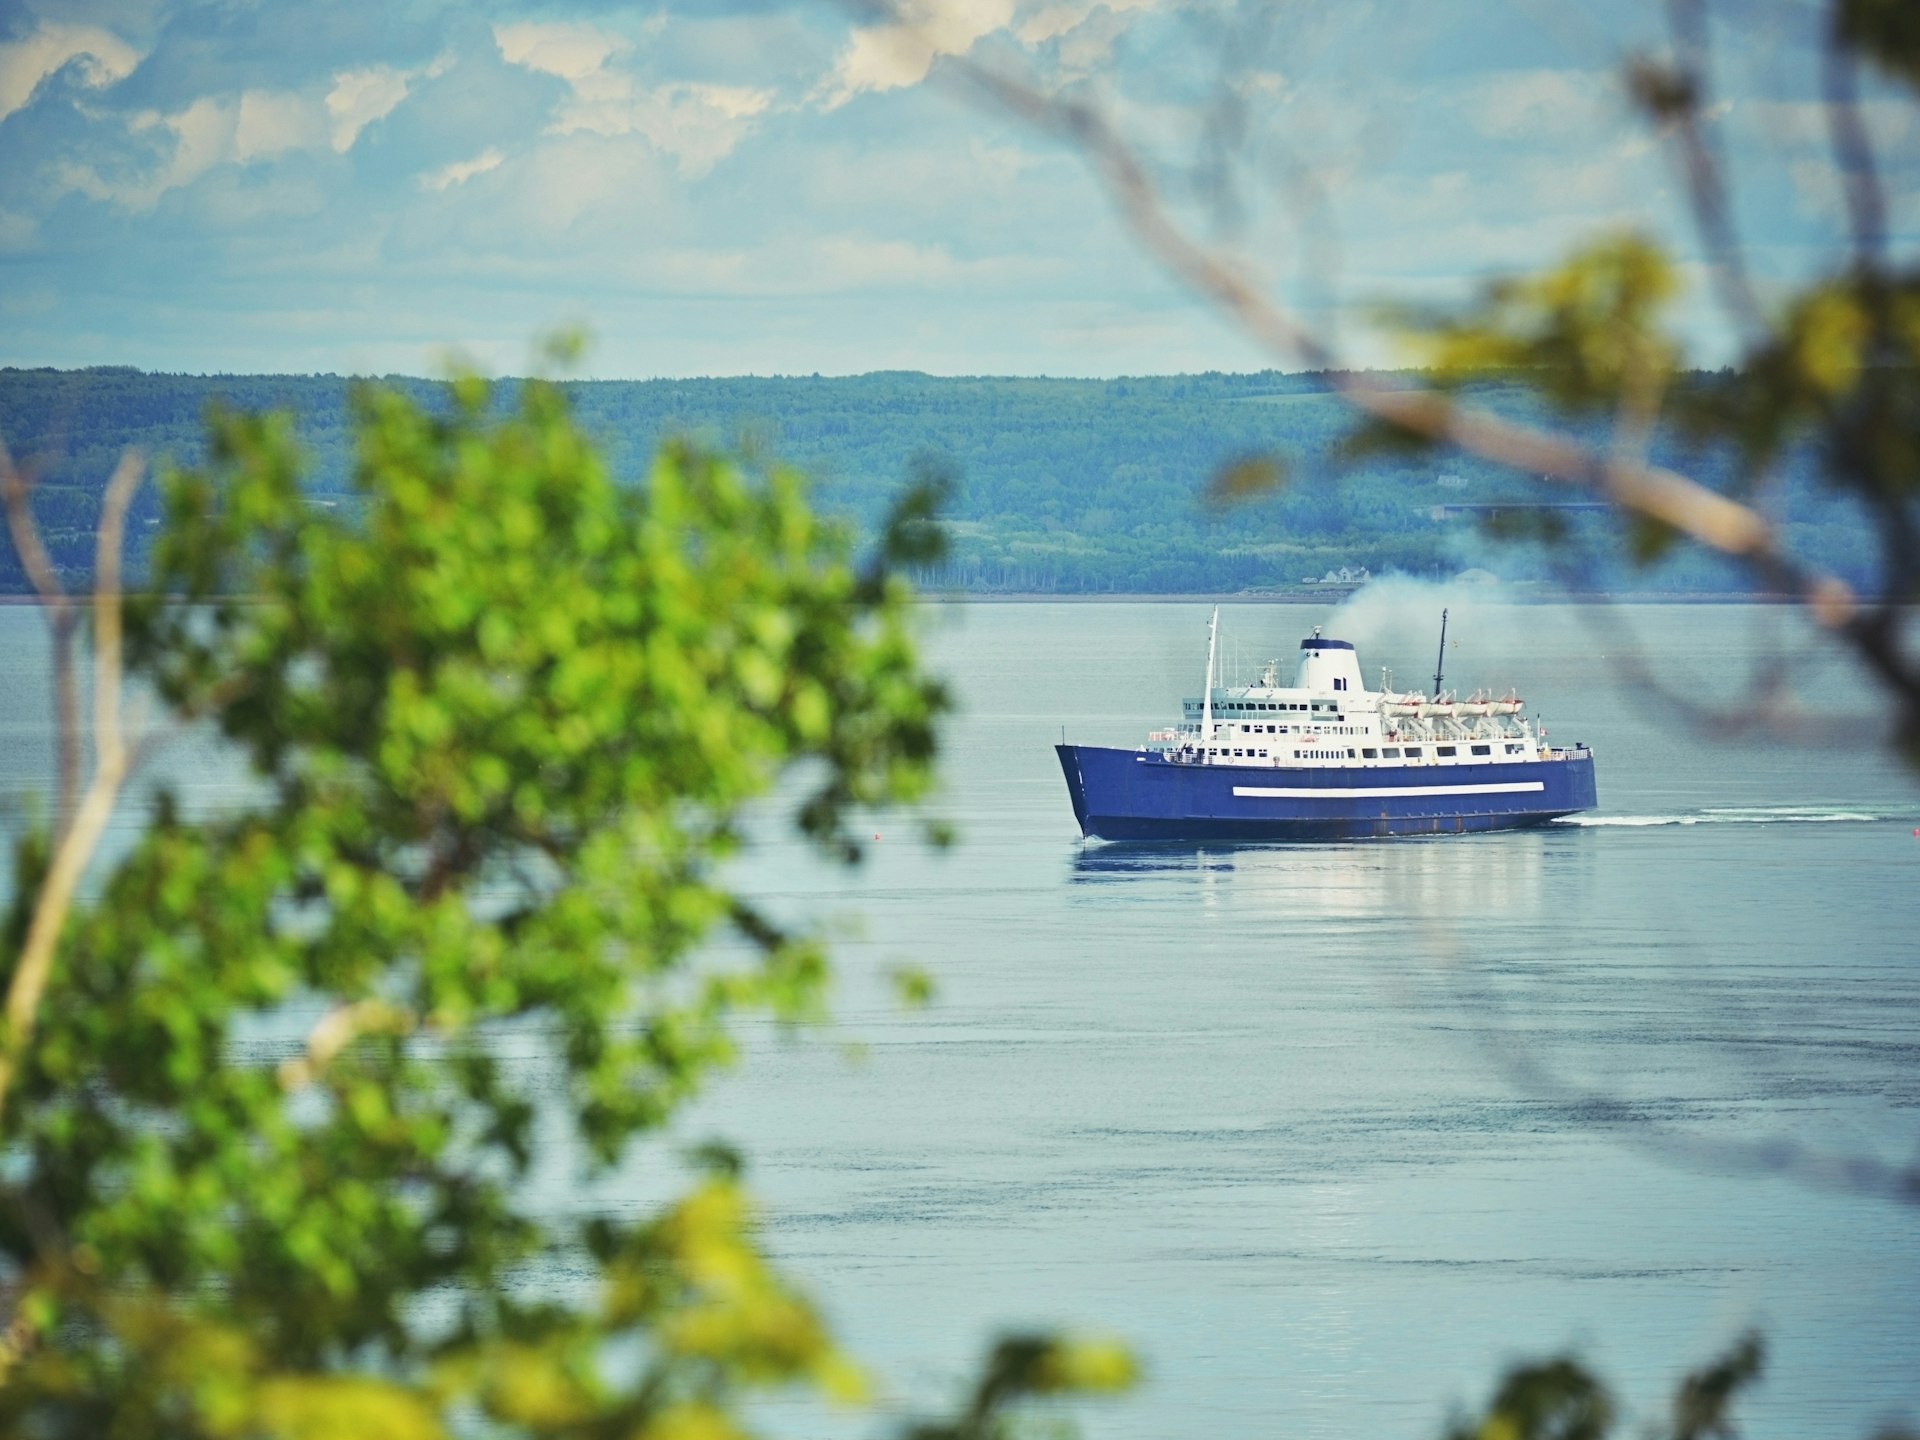 A white and blue ferry crosses a large body of water en route to Nova Scotia, Canada. The image is framed by the branches of a tree in the foreground.